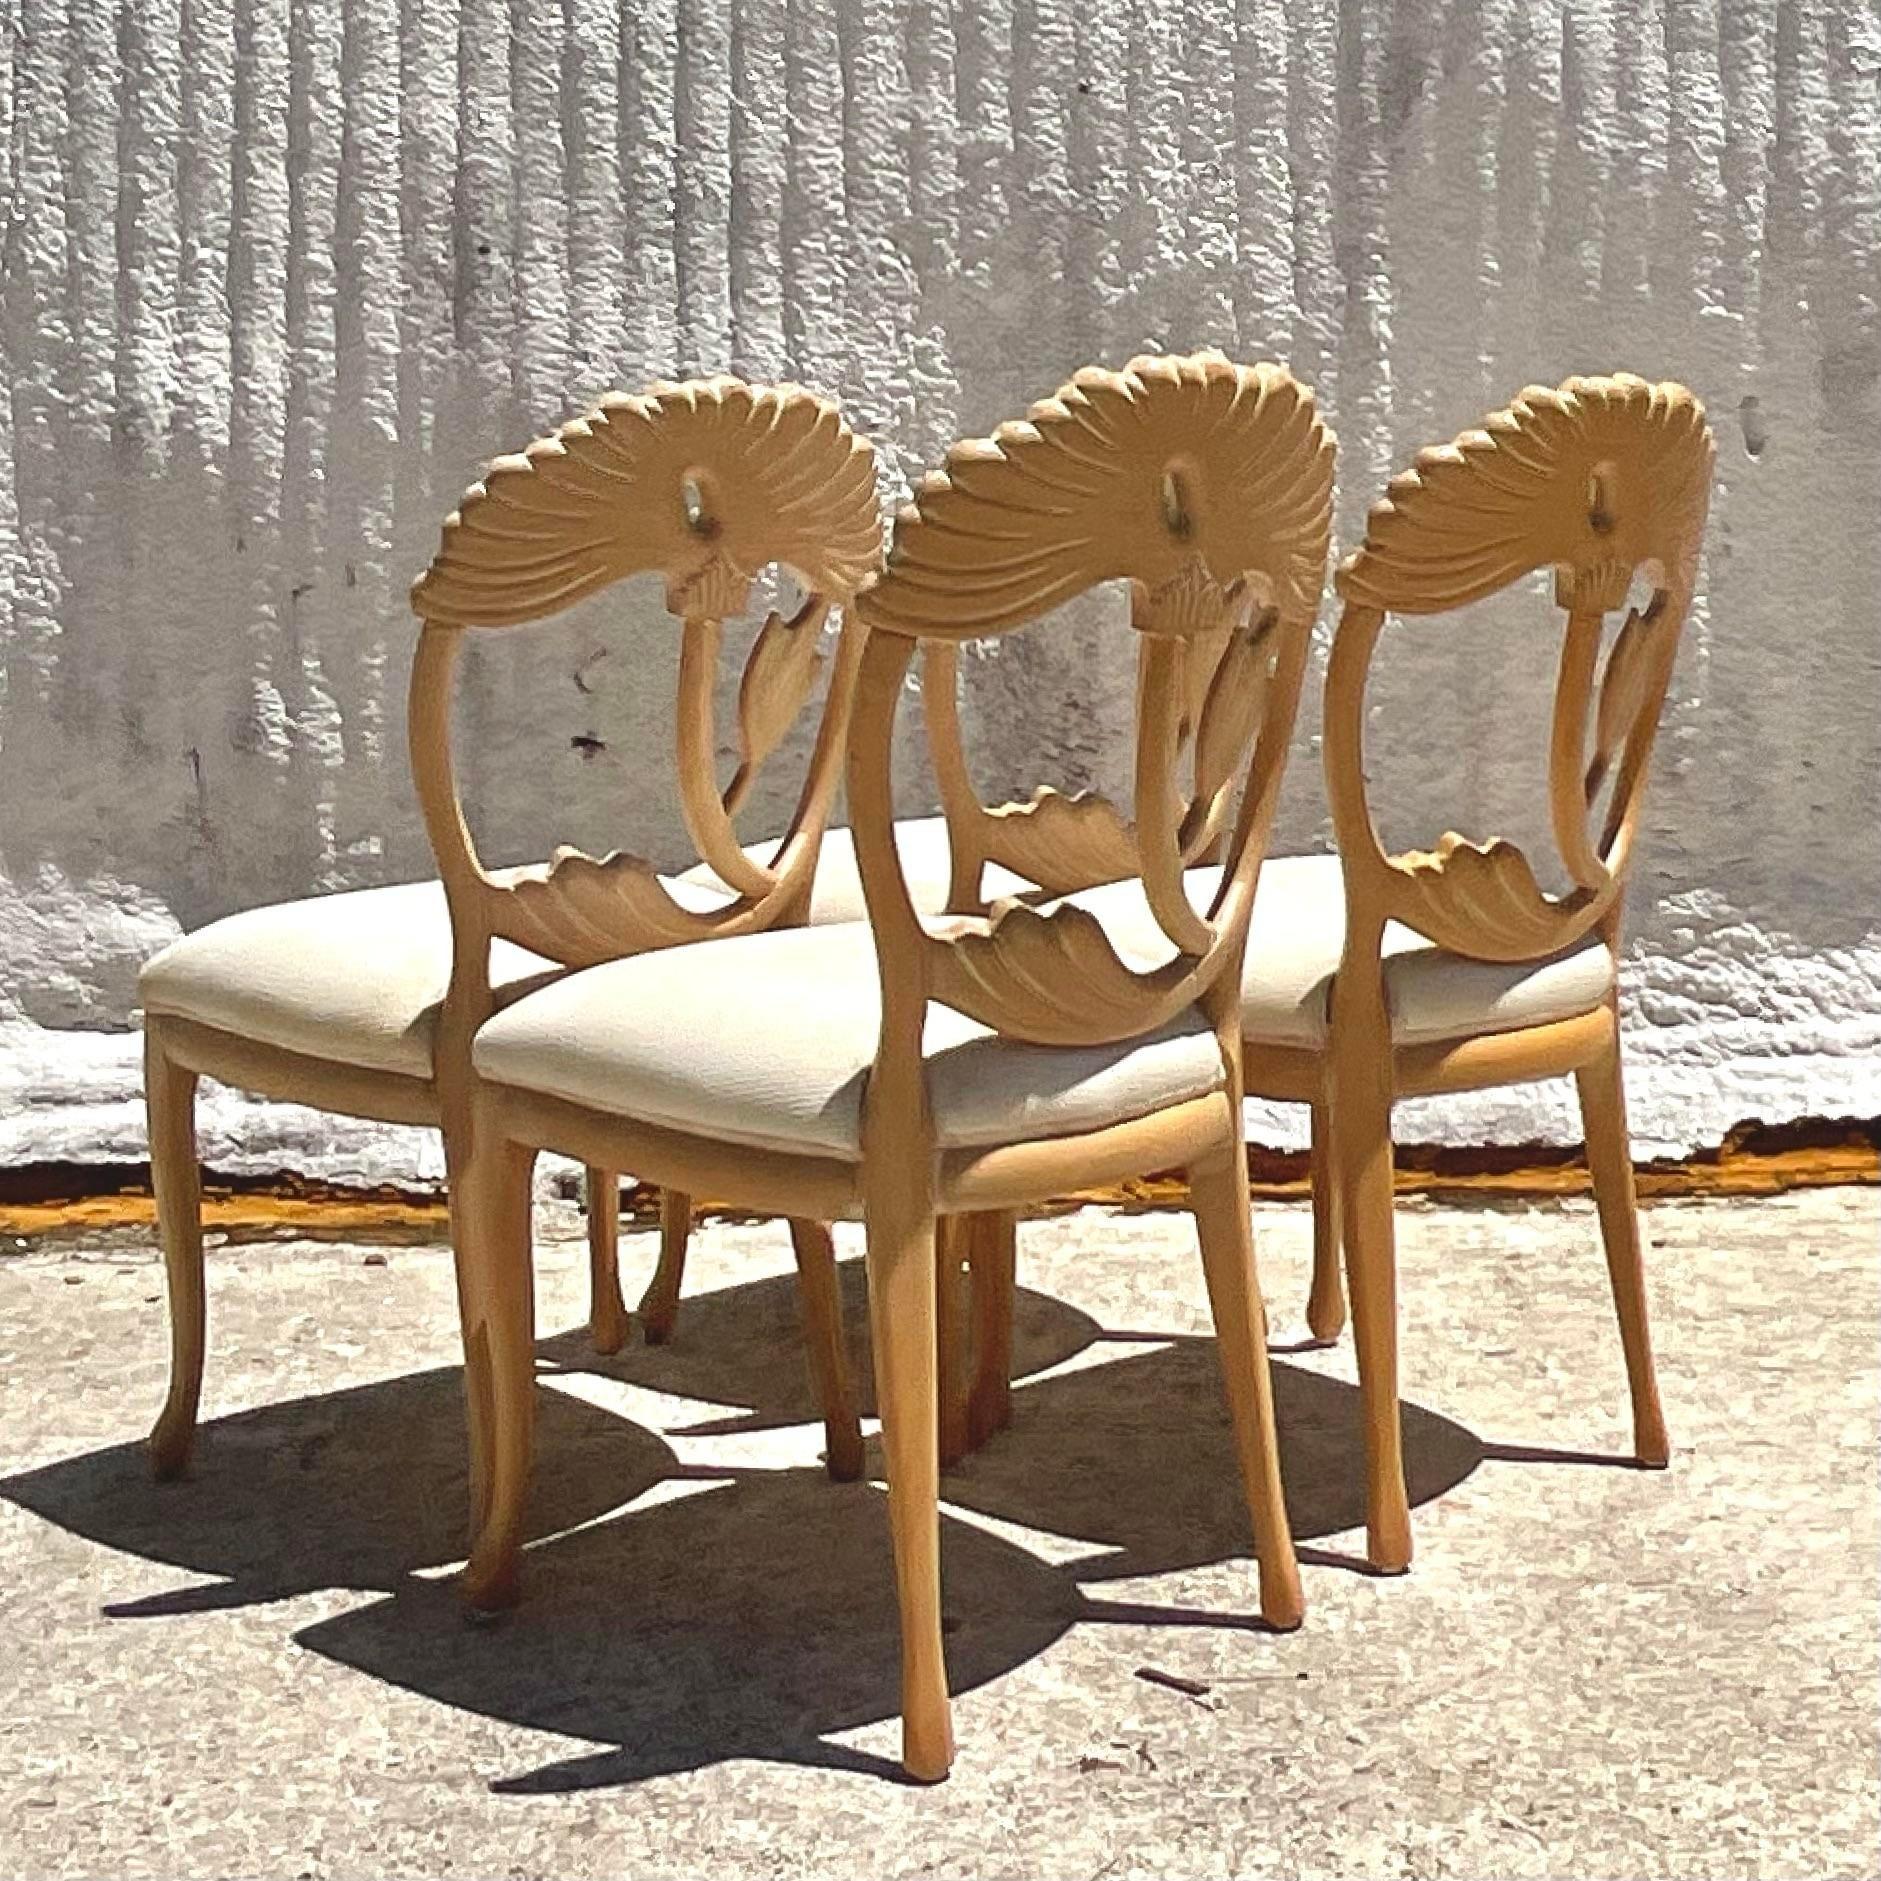 20th Century Vintage Boho Carved Lotus Blossom Dining Chairs - Set of 4 For Sale